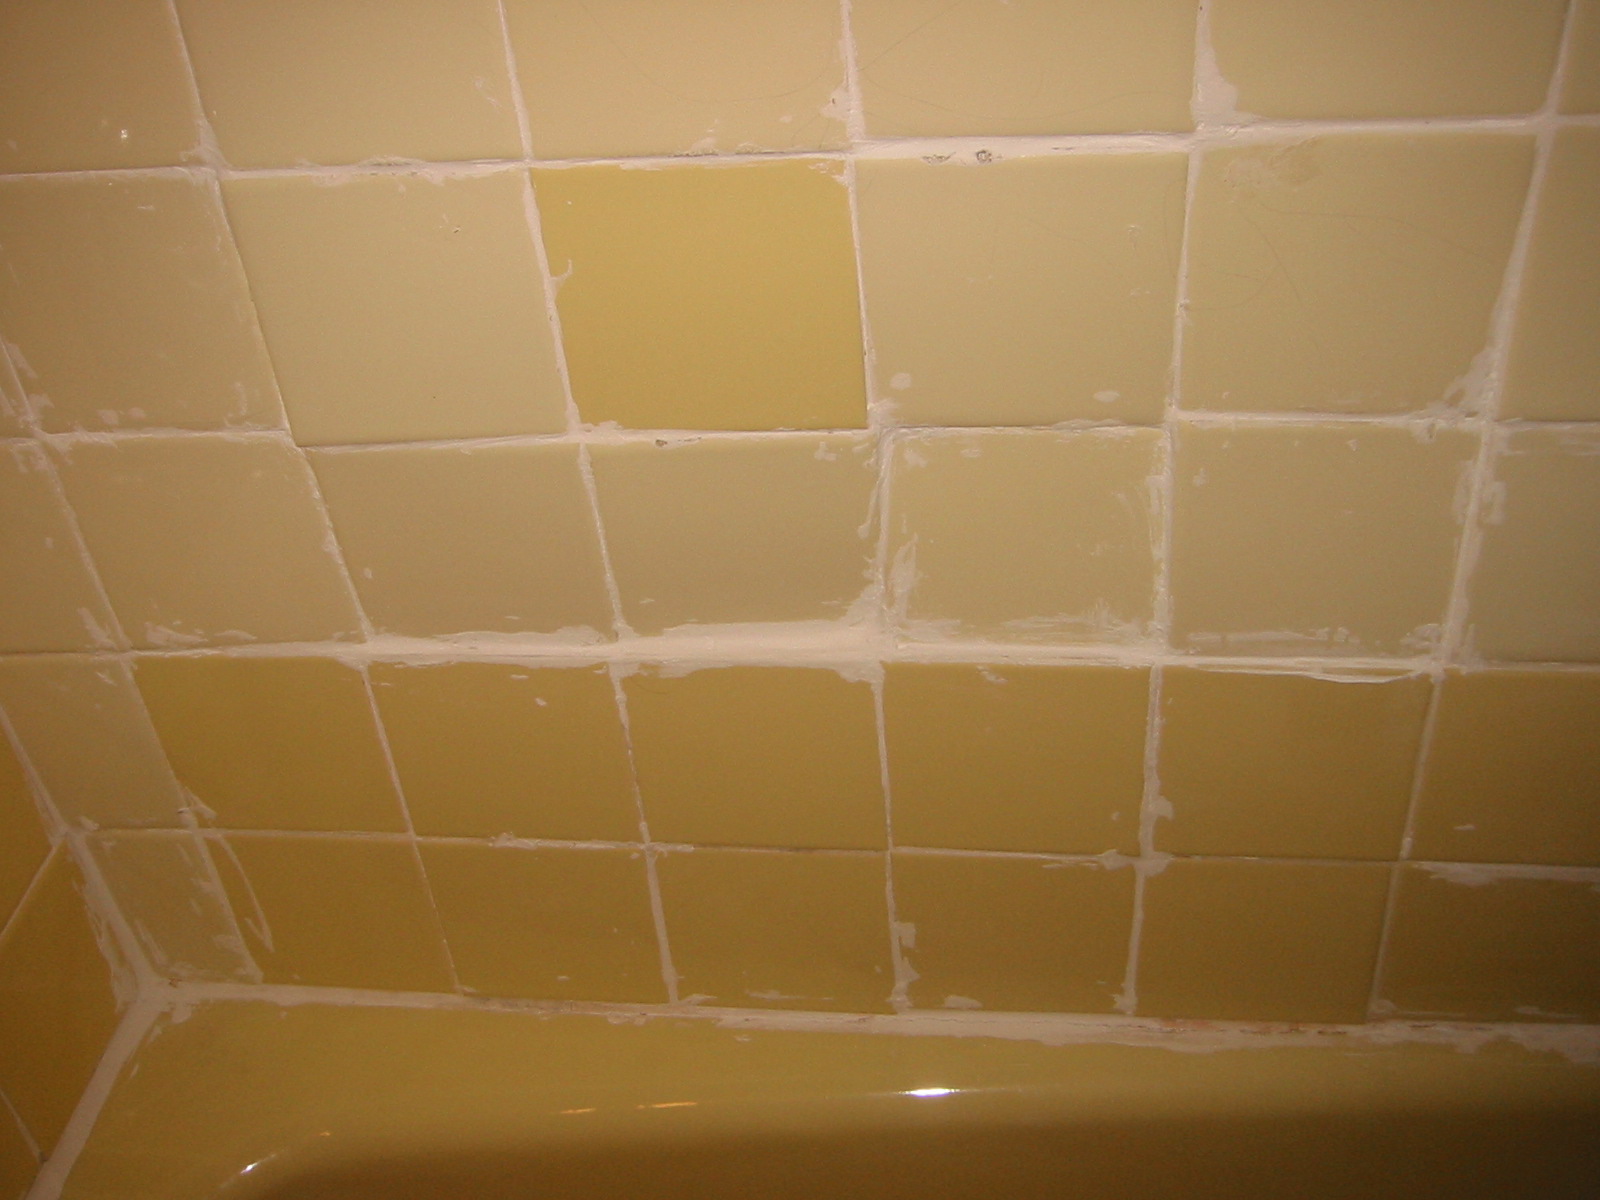 Your Bathroom Tiles Look Old And Need, How Do You Cover Old Bathroom Tiles